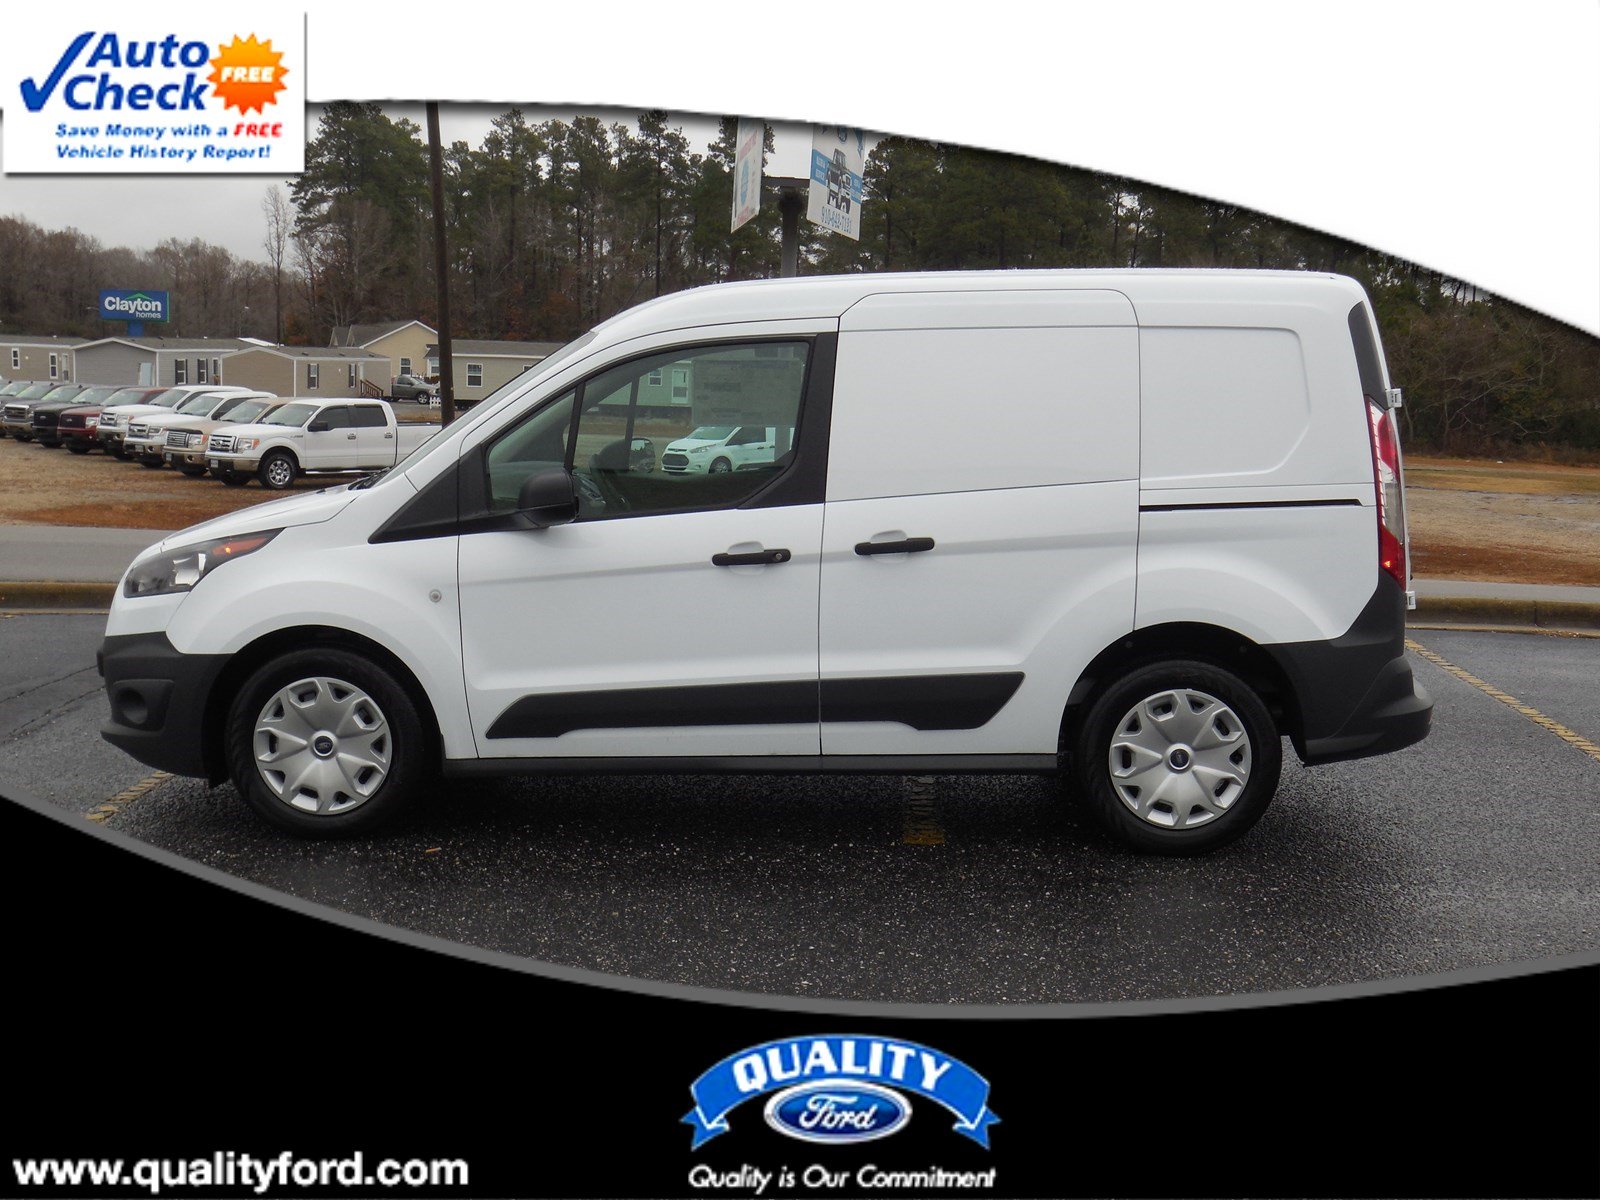 2018 ford transit connect xlt cargo van for sale